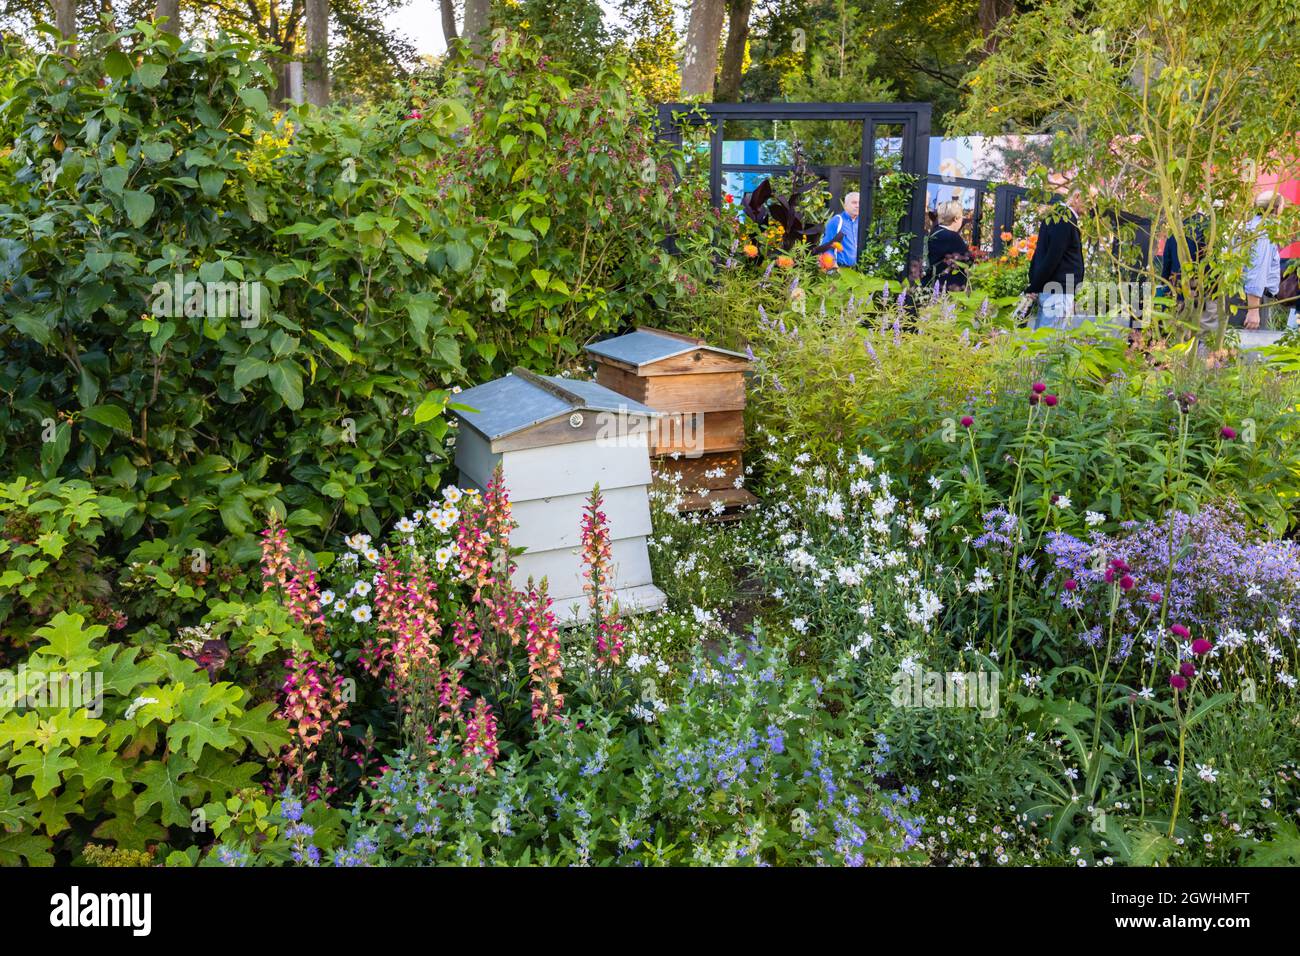 RHS COP26 Garden for Protecting BIODIVERSITE and Climate change, RHS Chelsea Flower Show, Royal Hospital Chelsea, London SW3, septembre 2021 Banque D'Images